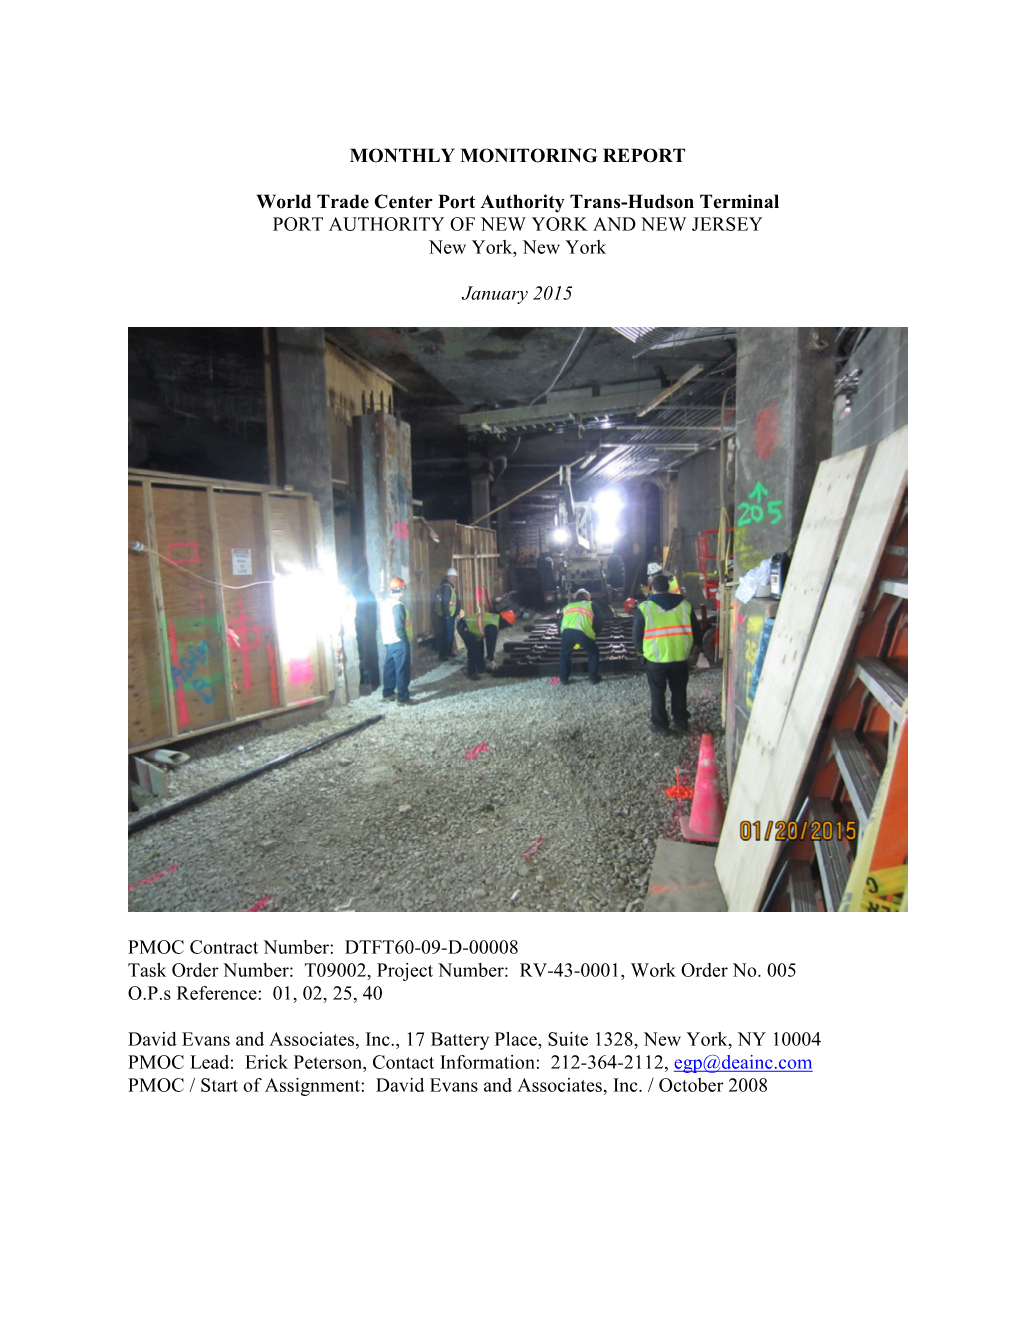 January 2015 Montly Monitoring Report, World Trade Center Port